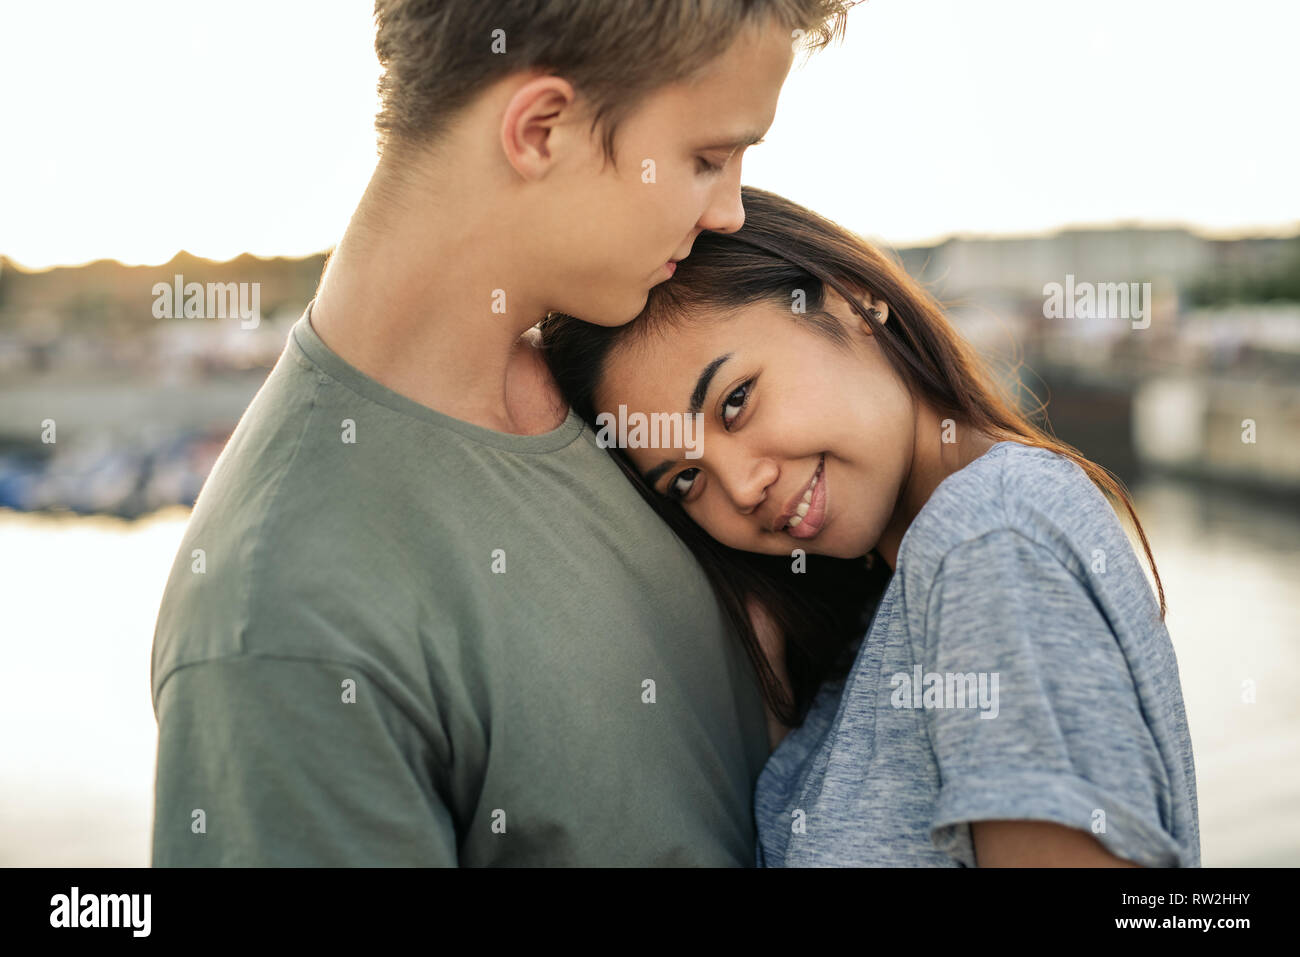 Smiling young woman hugging her boyfriend outside by a harbor Stock Photo